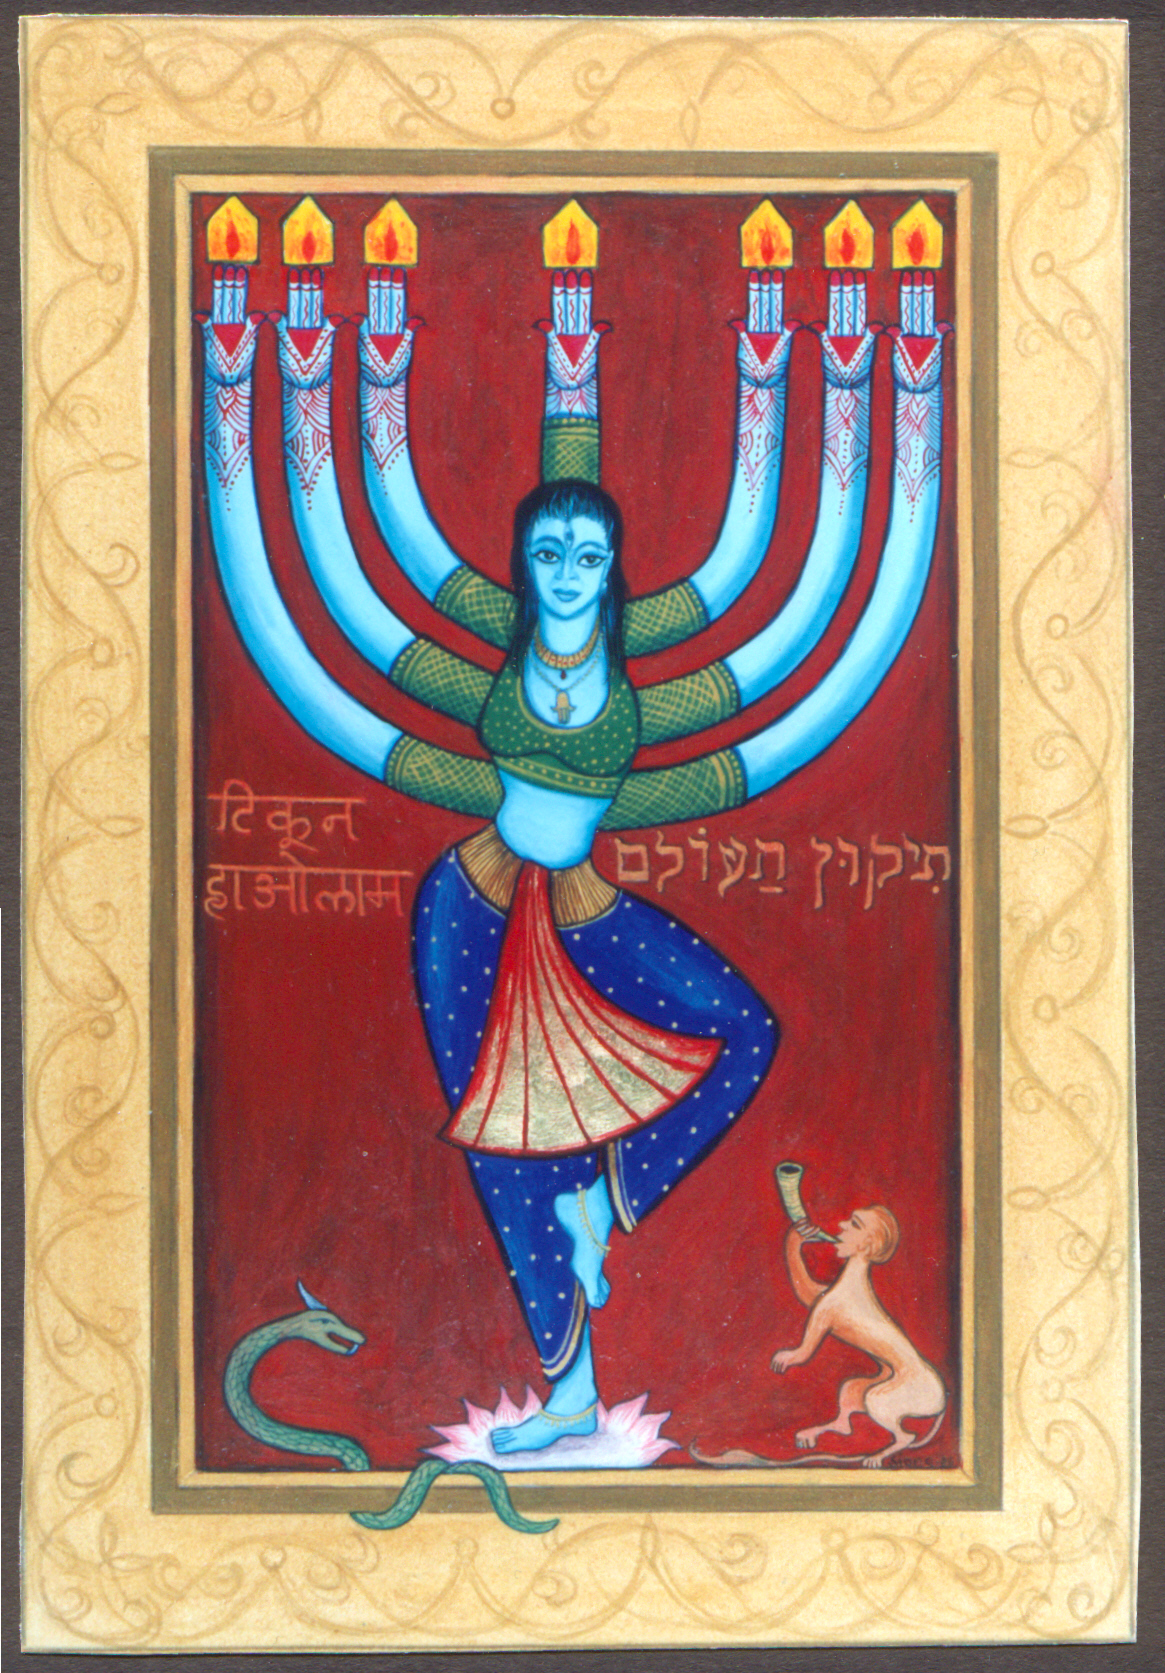 Painting of person standing in tree pose with seven arms in the air representing candelabra, with snake and half-man half-lion figure playing a shofar at the feet of the figure.